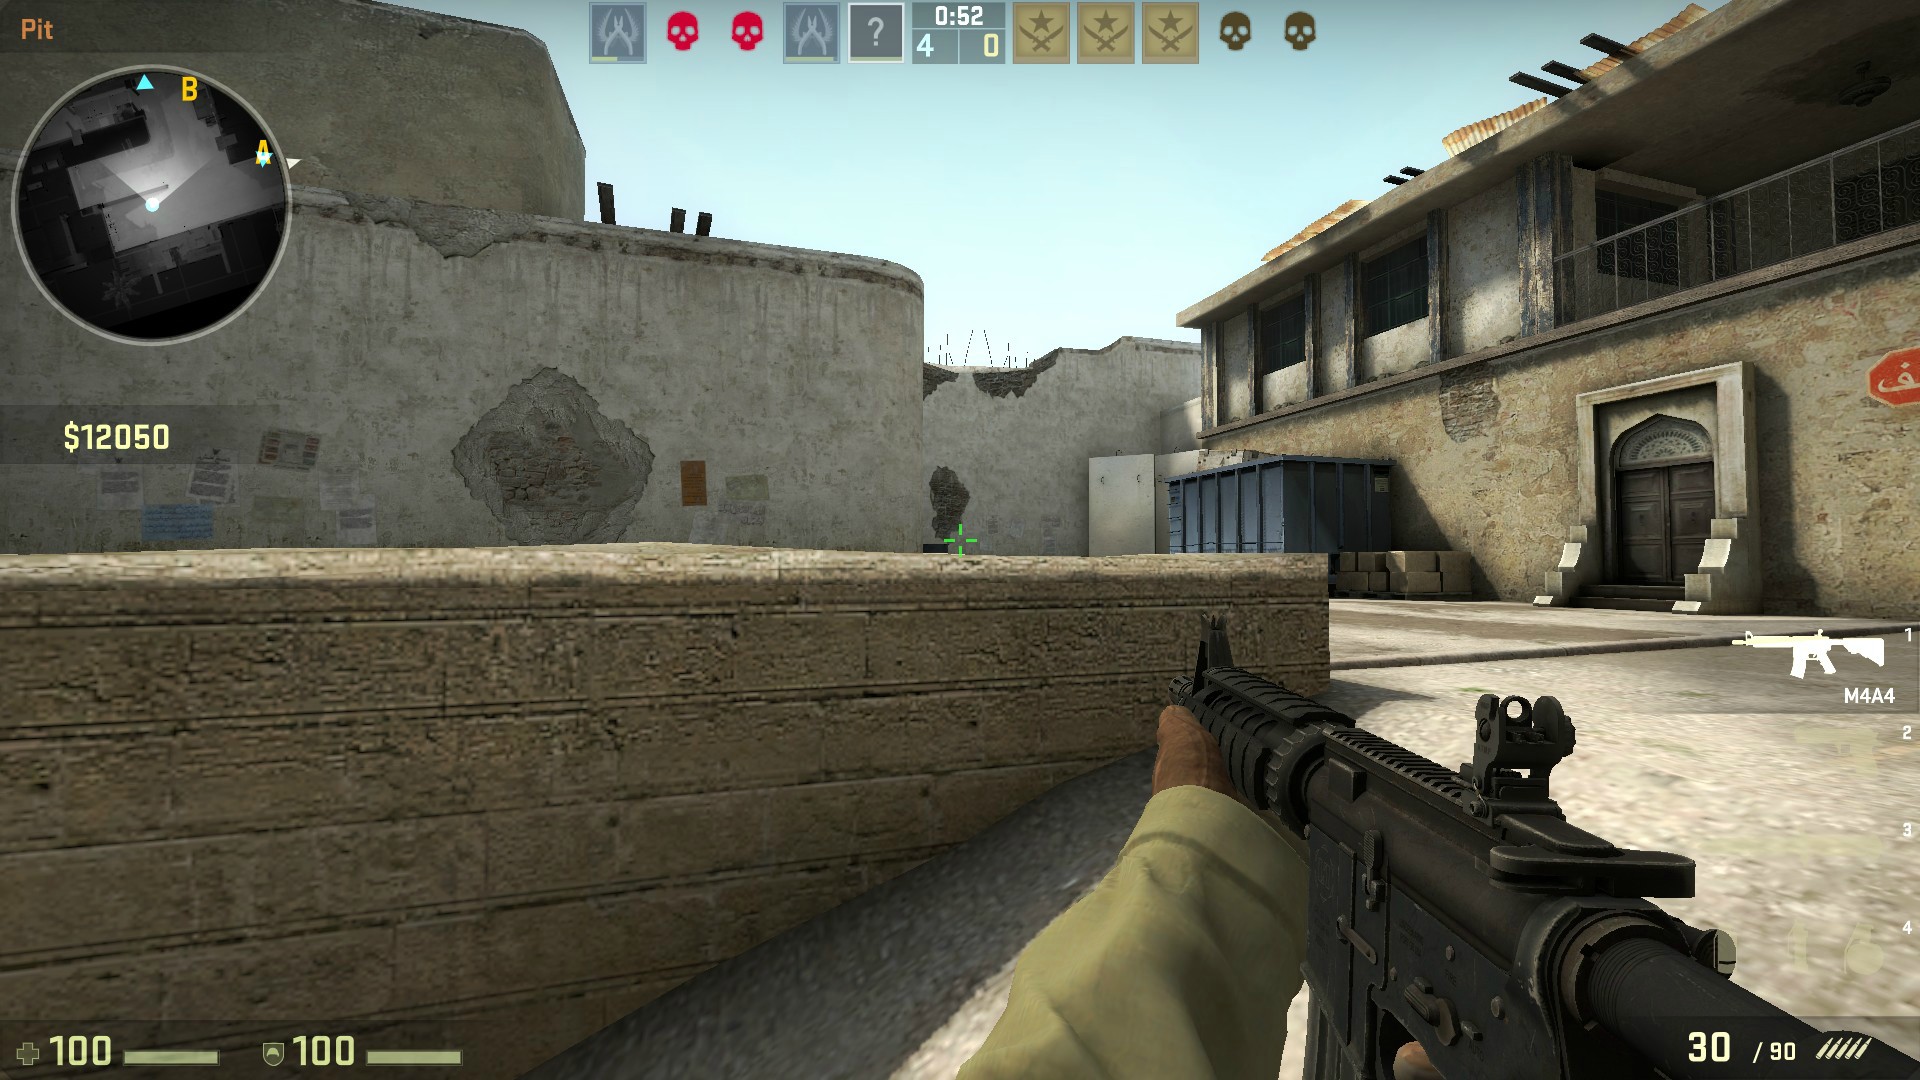 Match Fixing In Counter Strike Is Being A Rising Issue